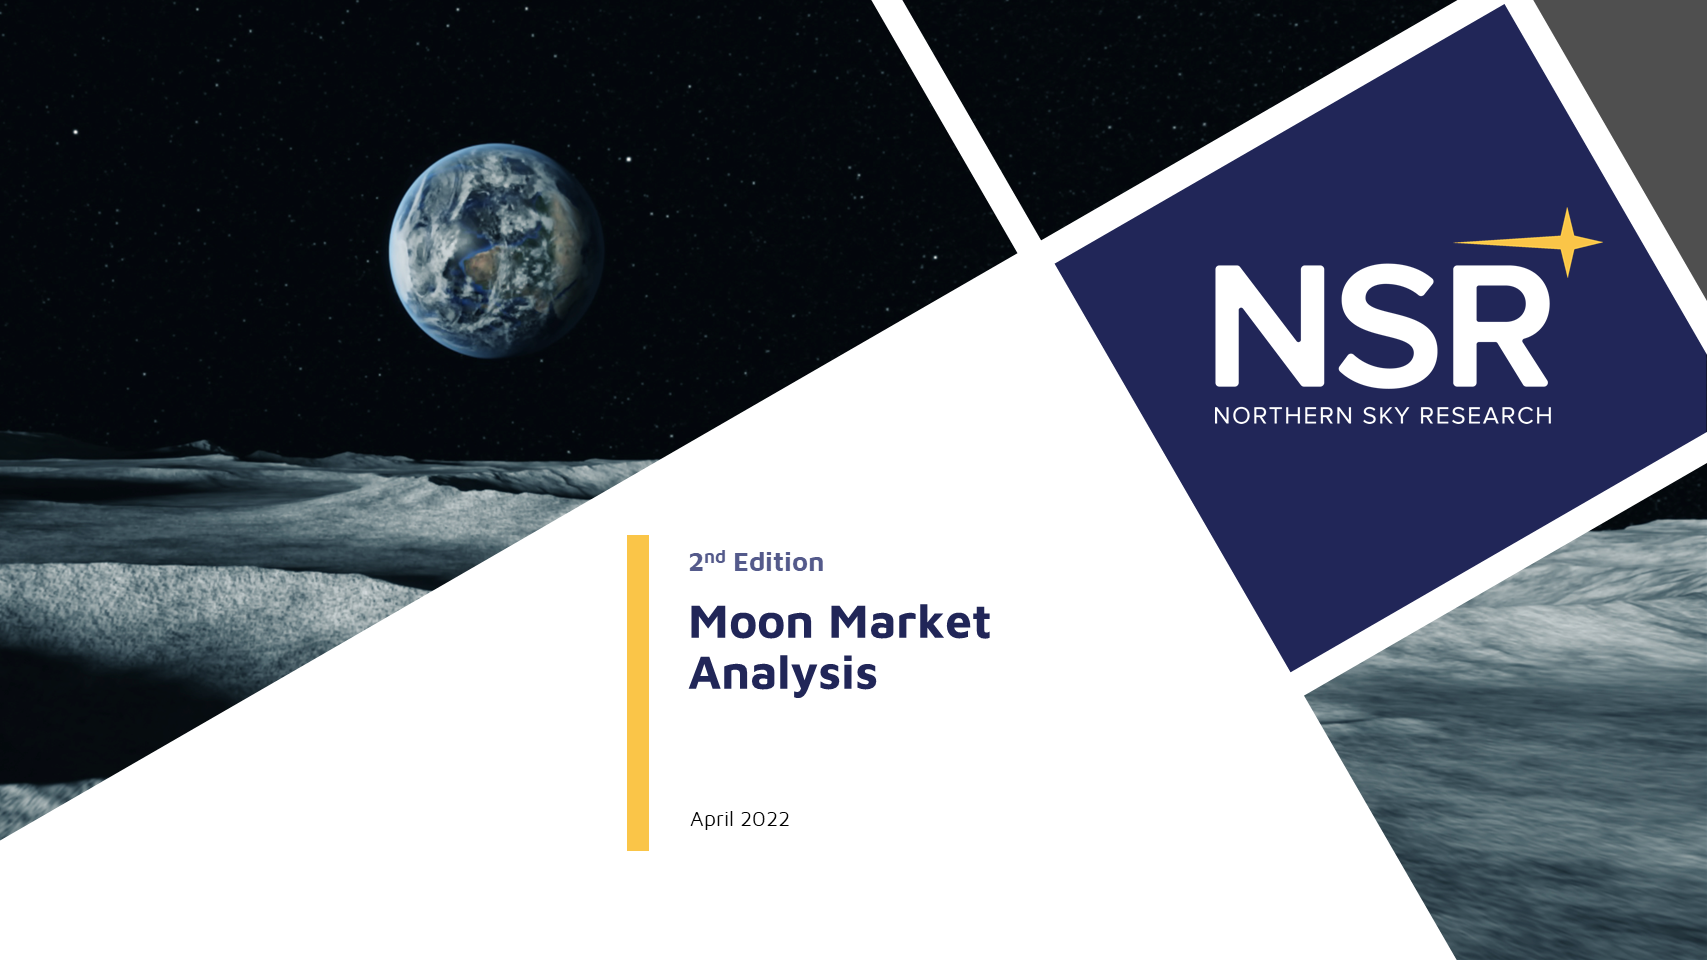 NSR: Developing Moon Market Propelled by 250+ Missions and $105 Billion in Revenue through Decade